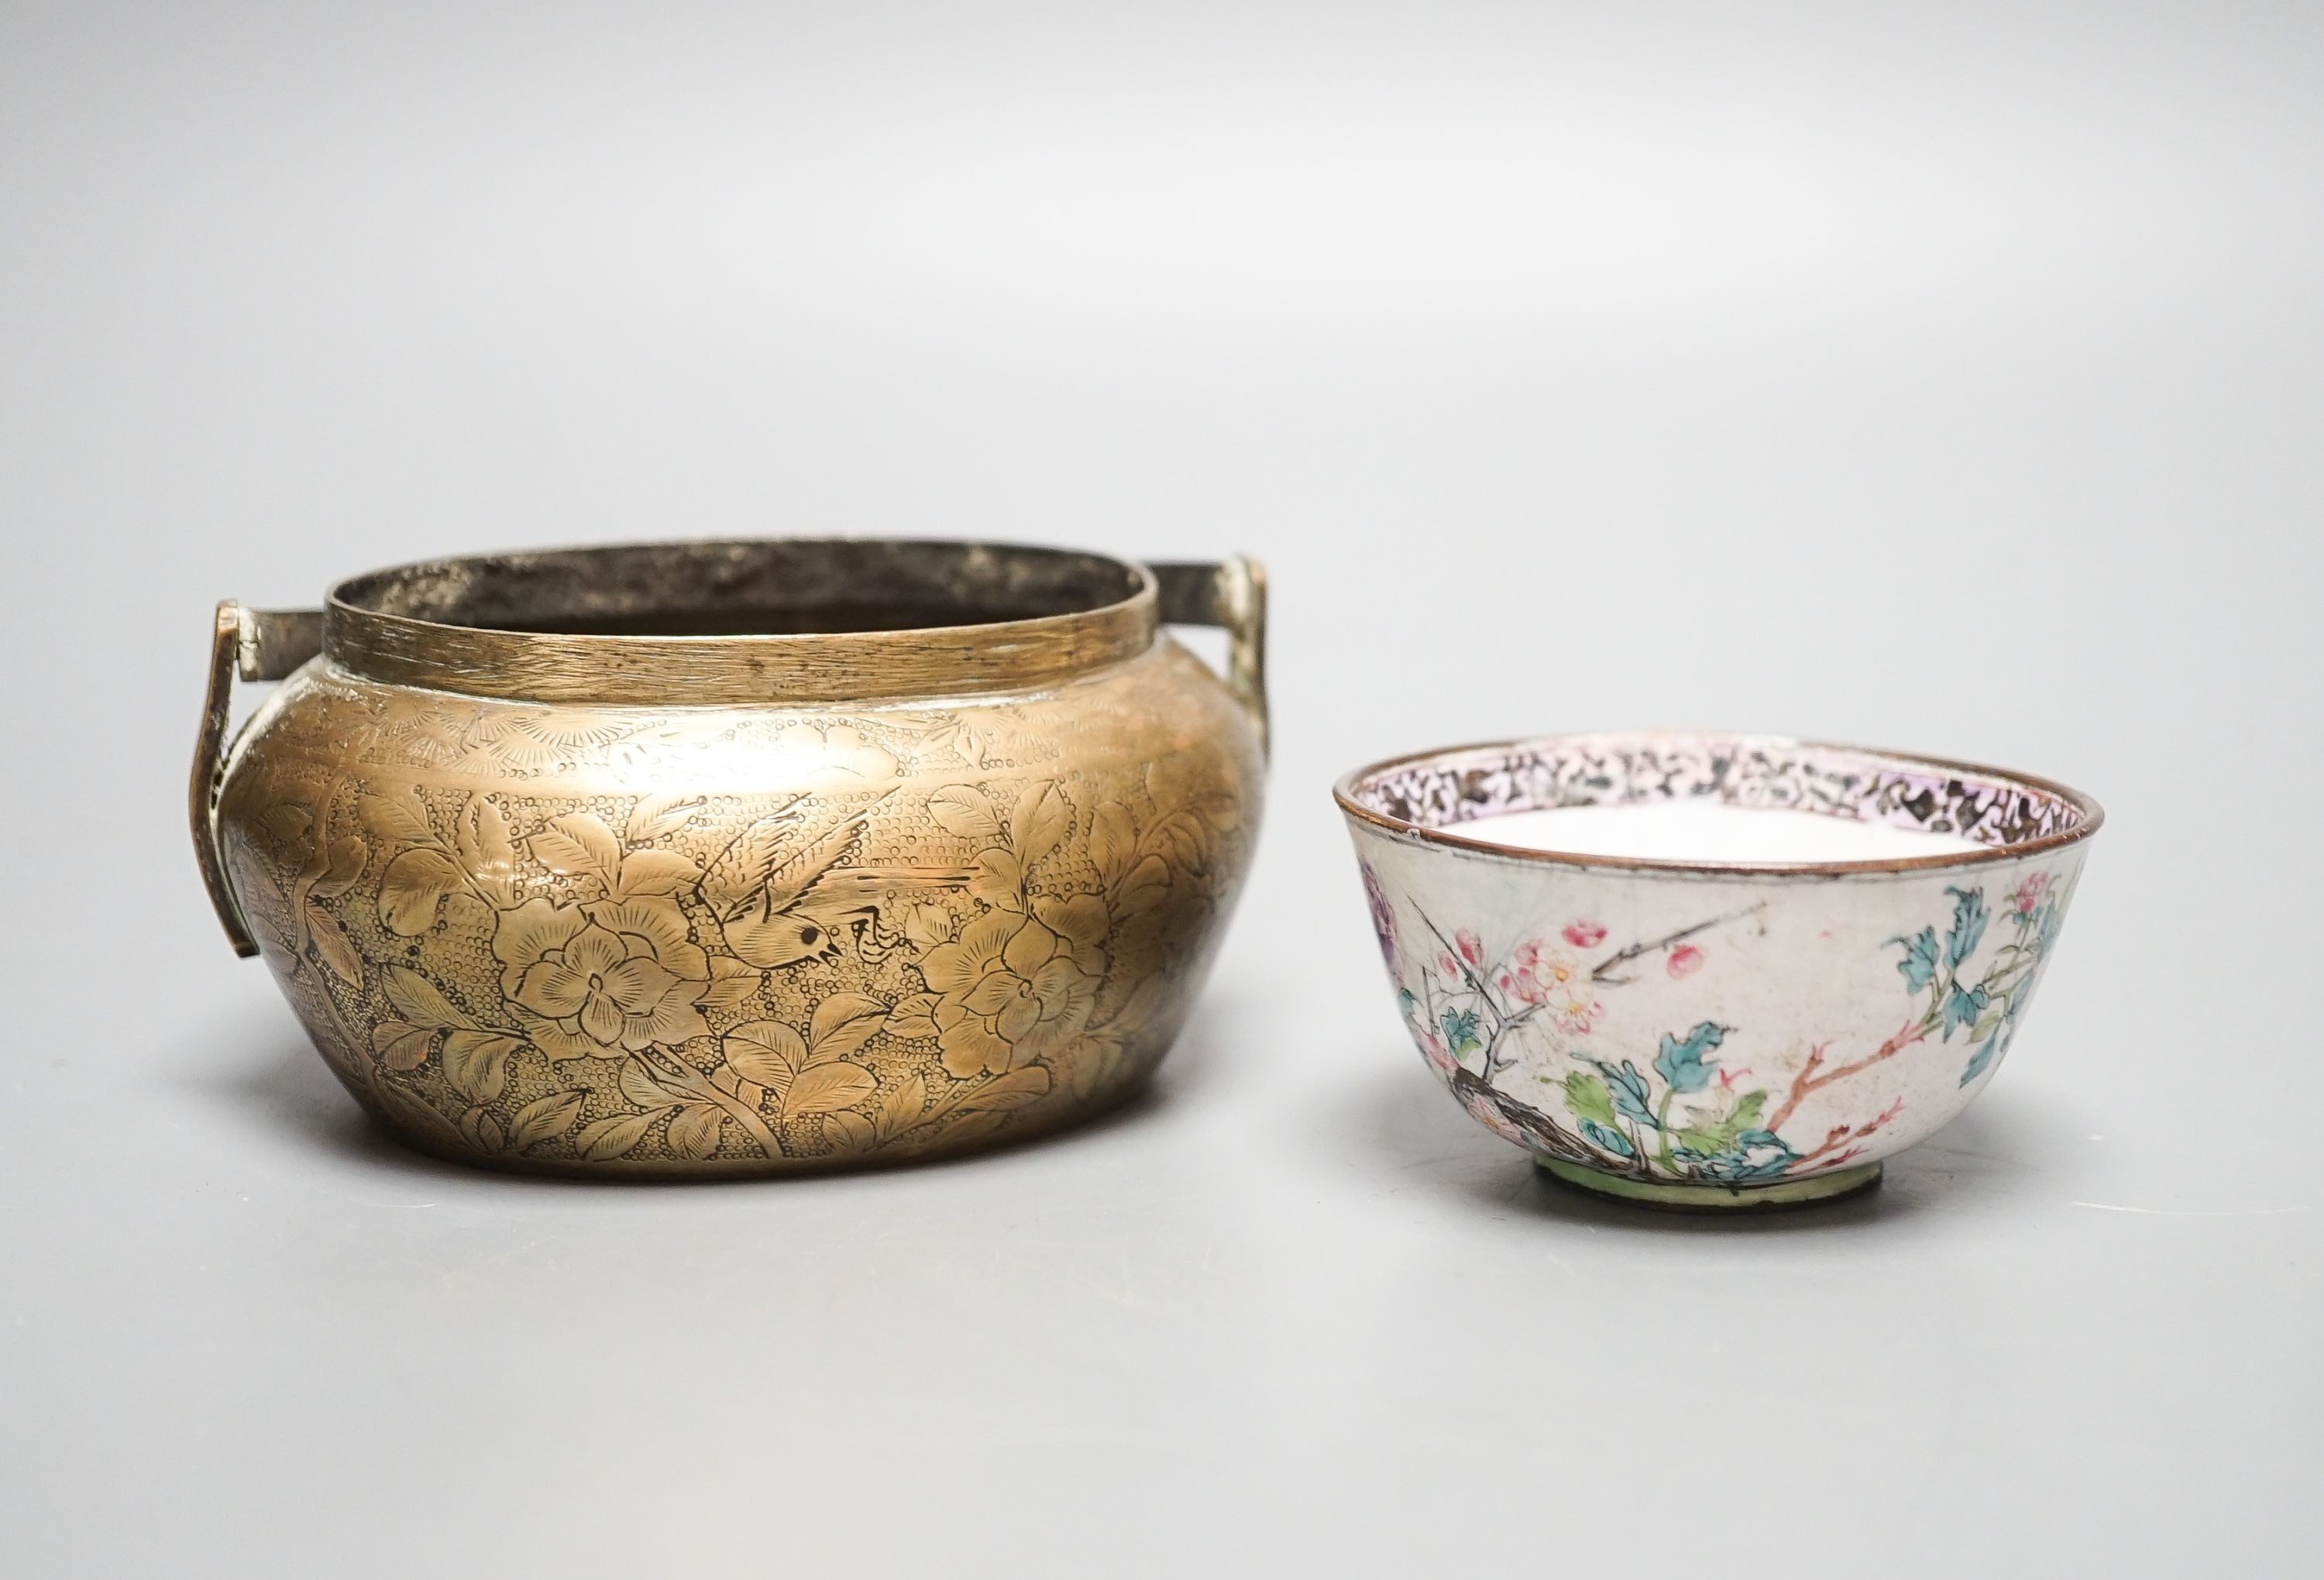 A Chinese bronze hand warmer, 11.3cm and an 18th century Chinese Canton enamel cup